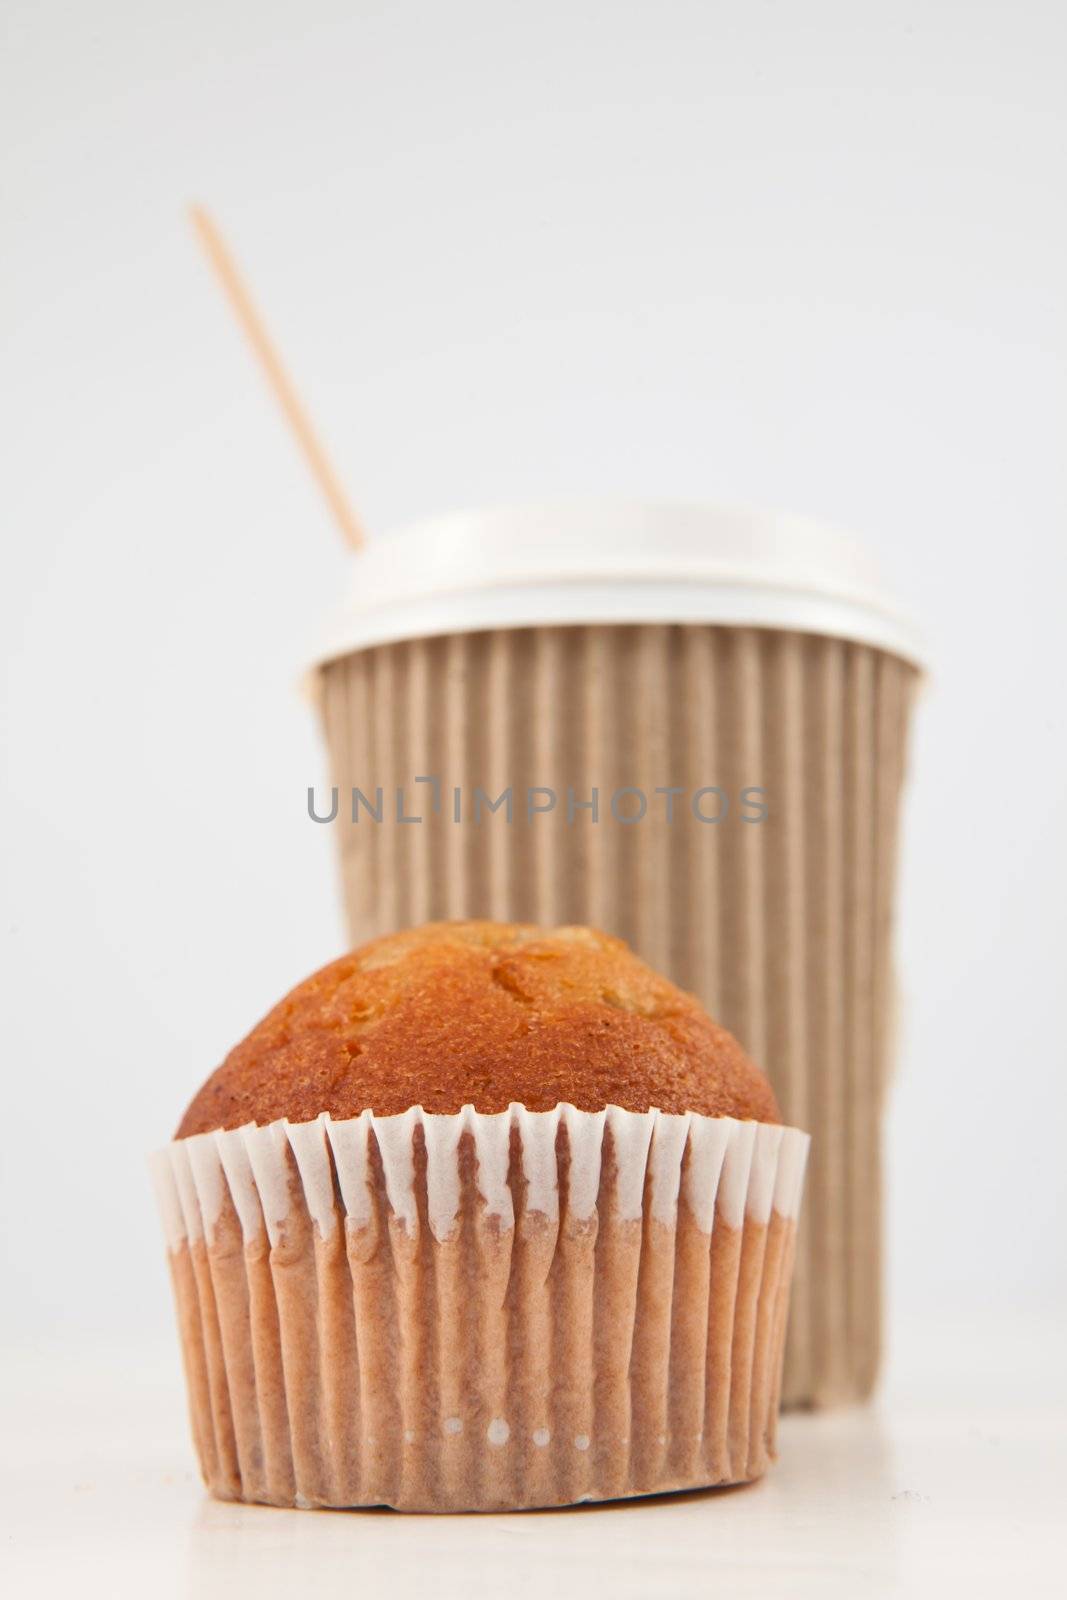 Muffin and cup of tea placed together by Wavebreakmedia